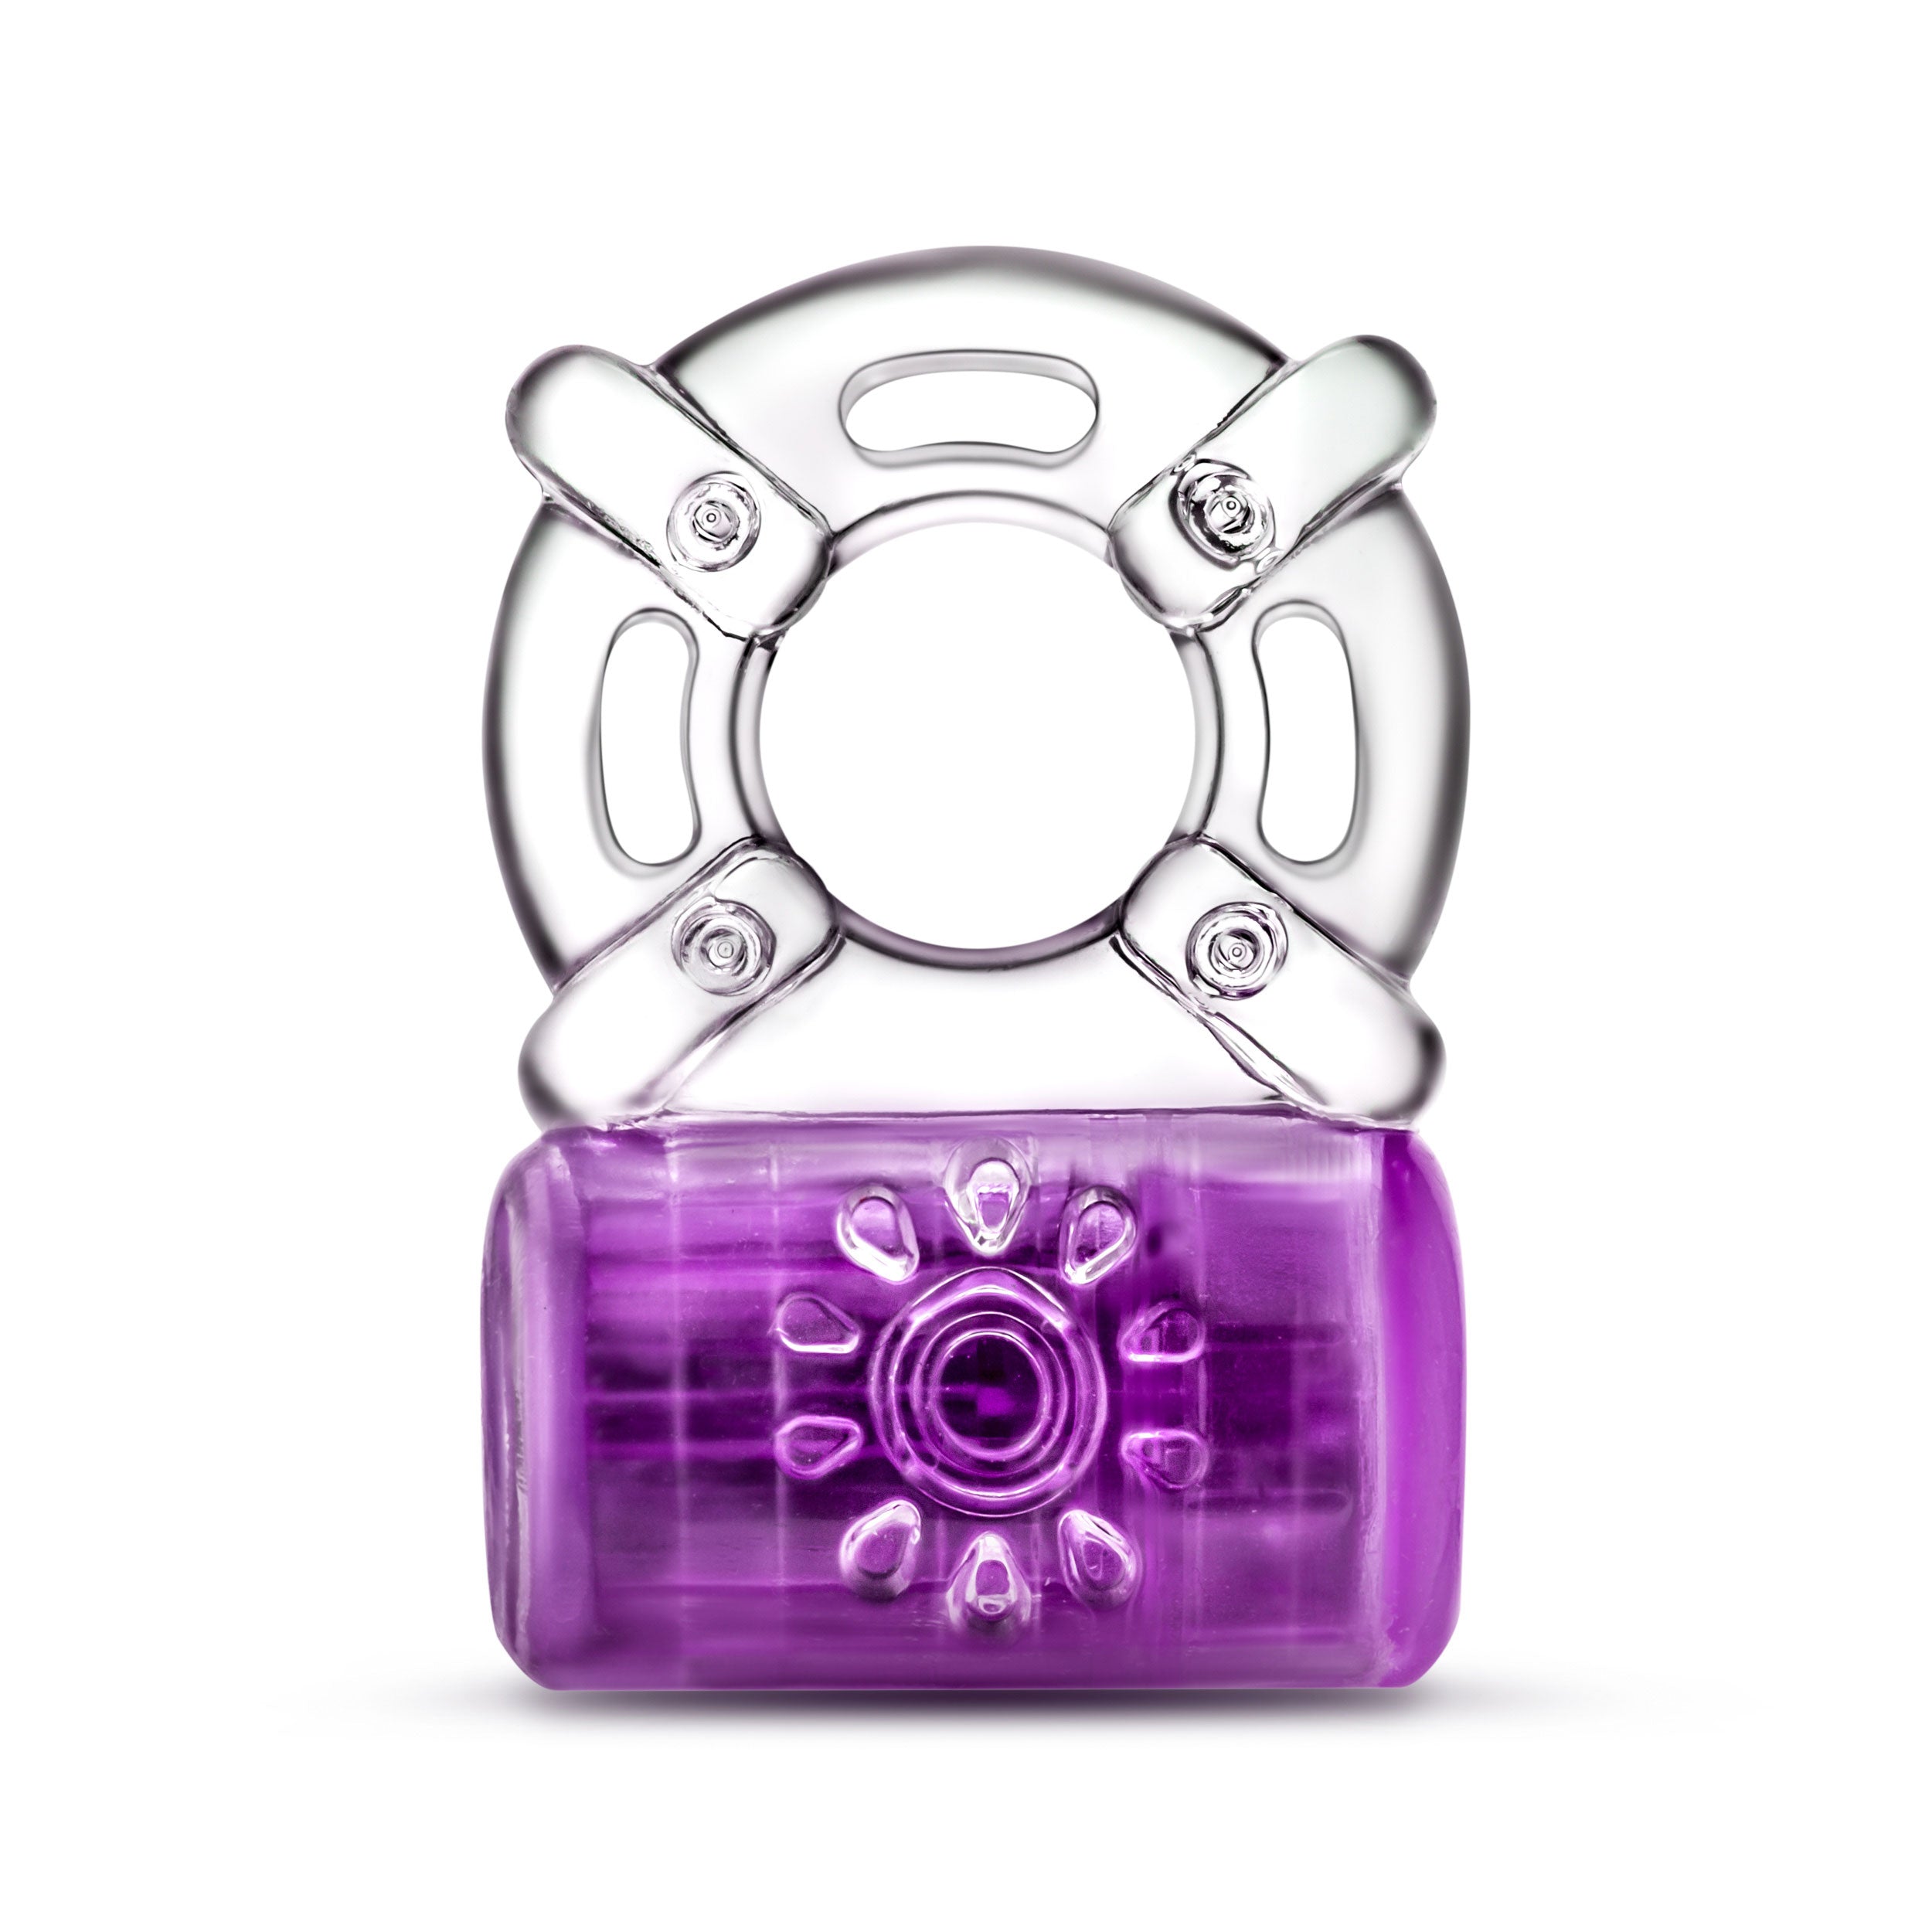 Play With Me - One Night Stand Vibrating C-Ring -  Purple BL-30811